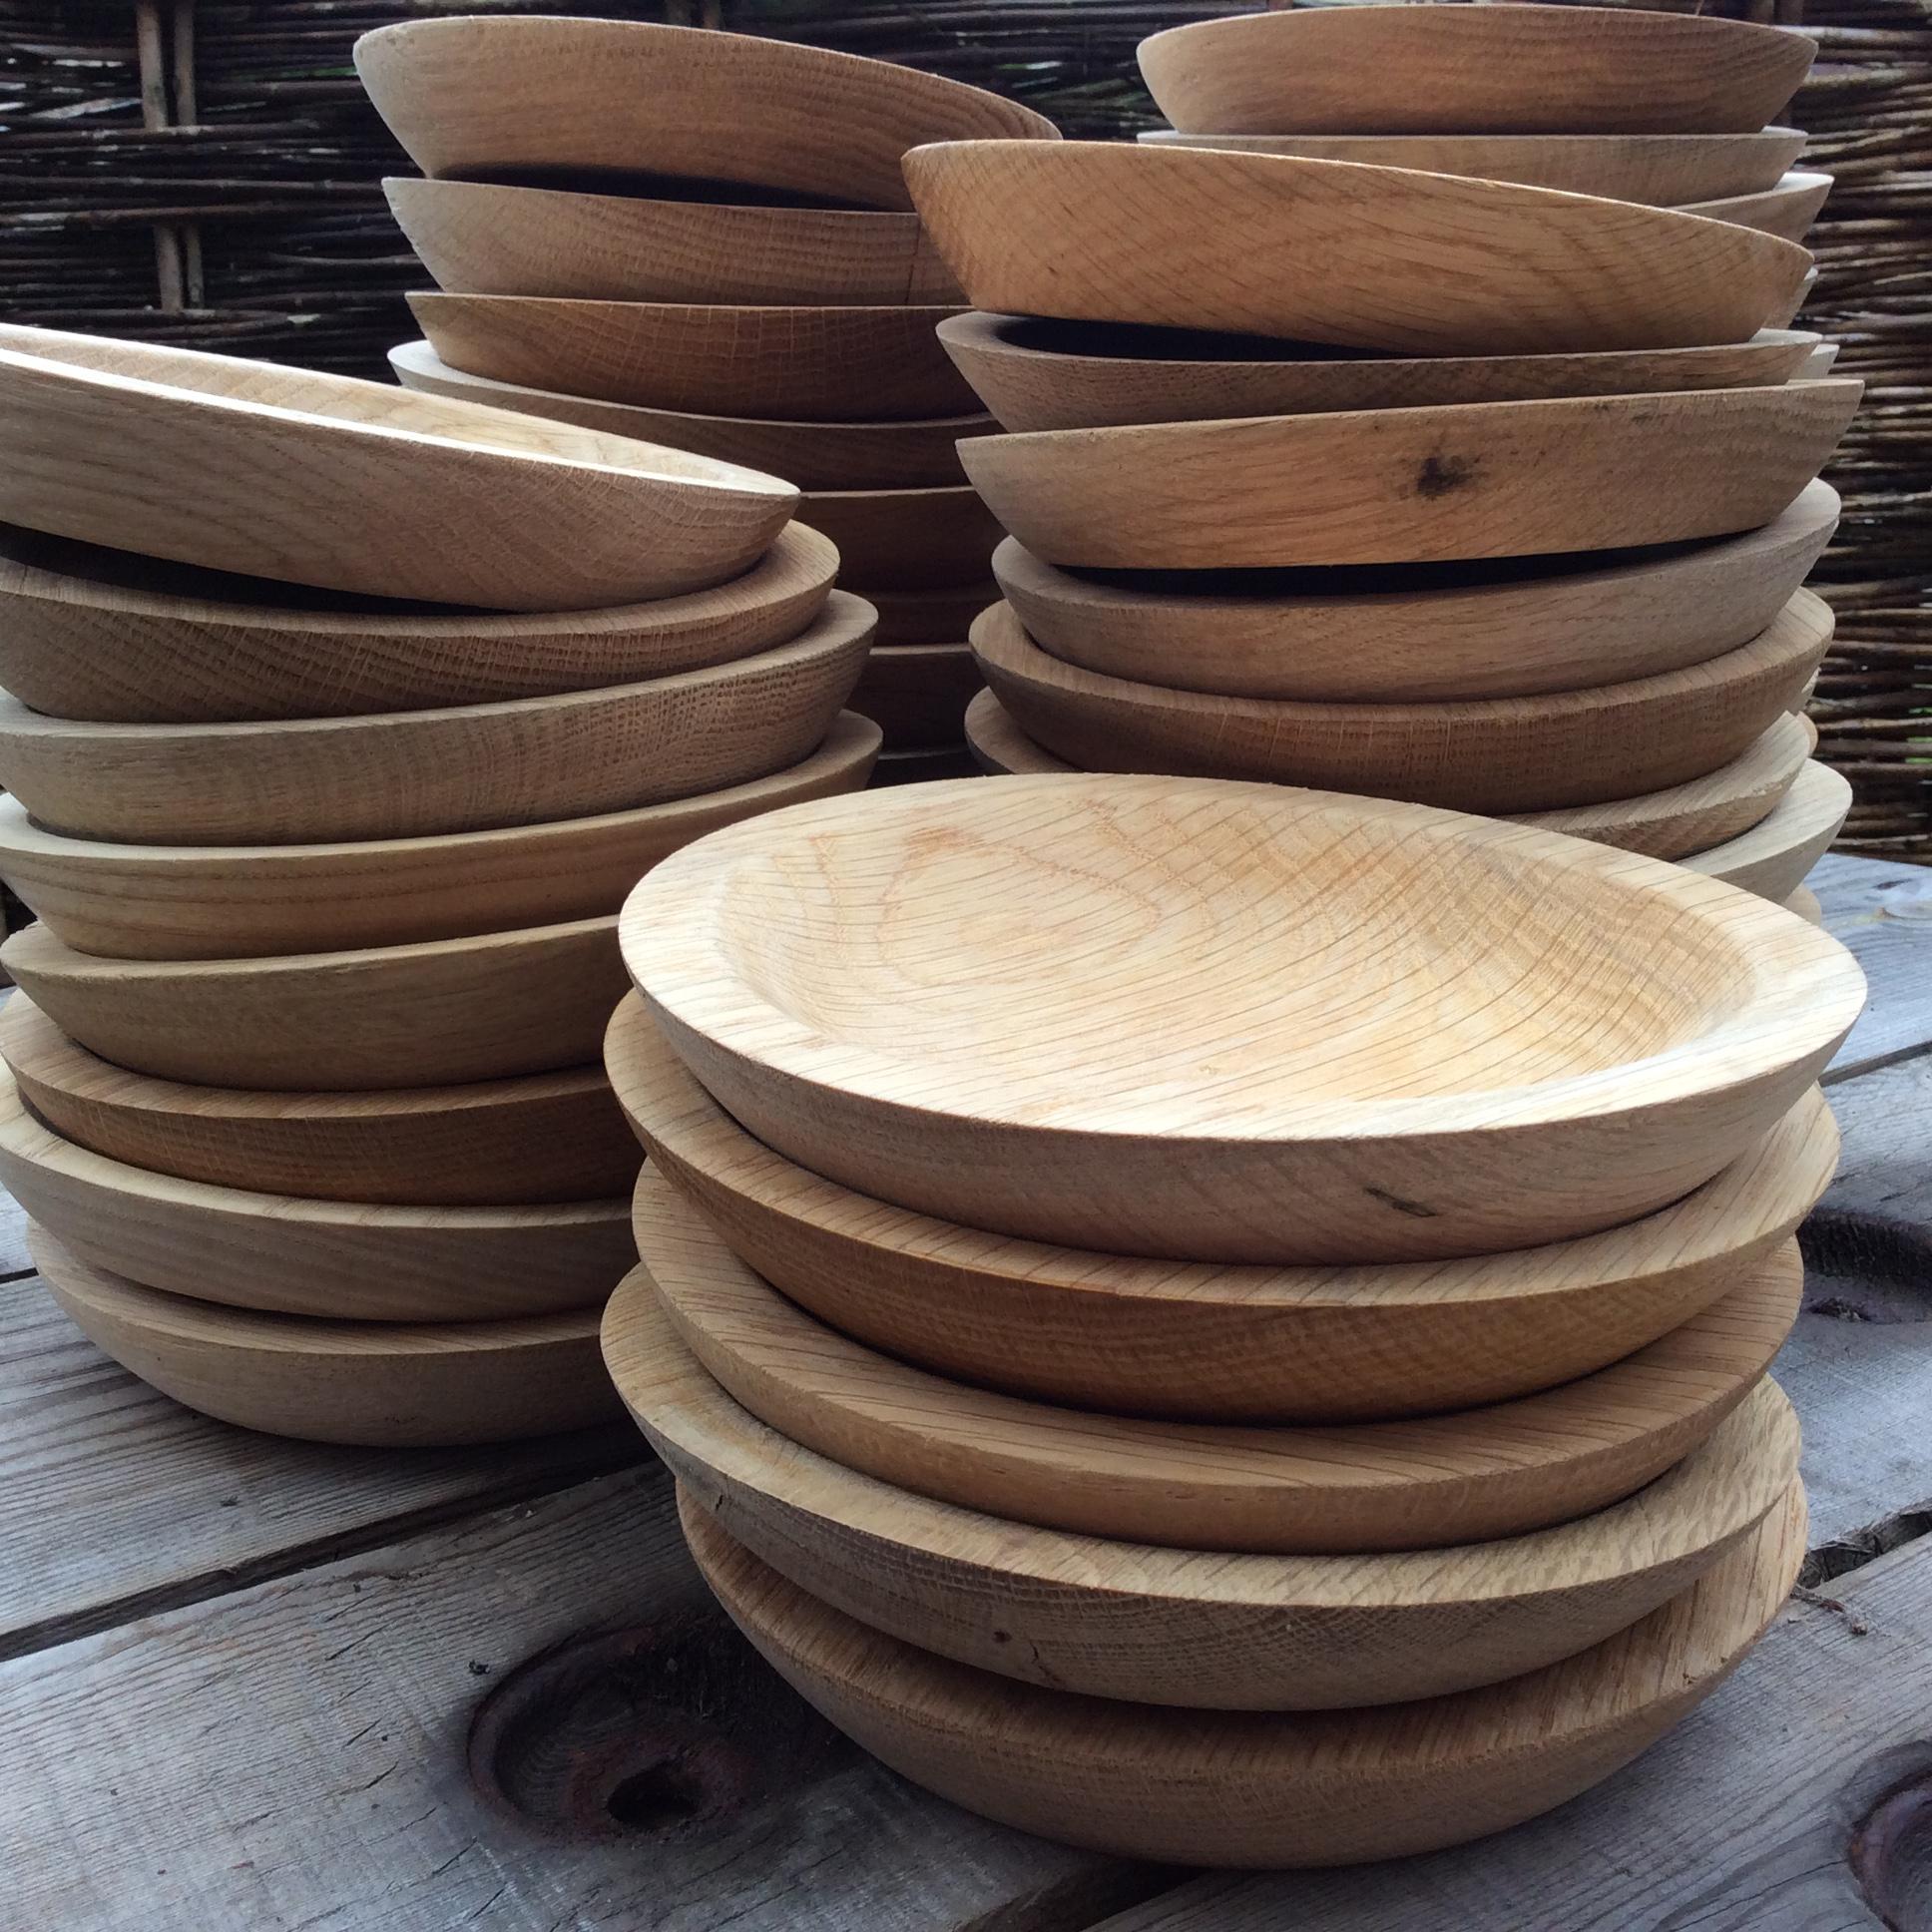 Stack of wooden plates